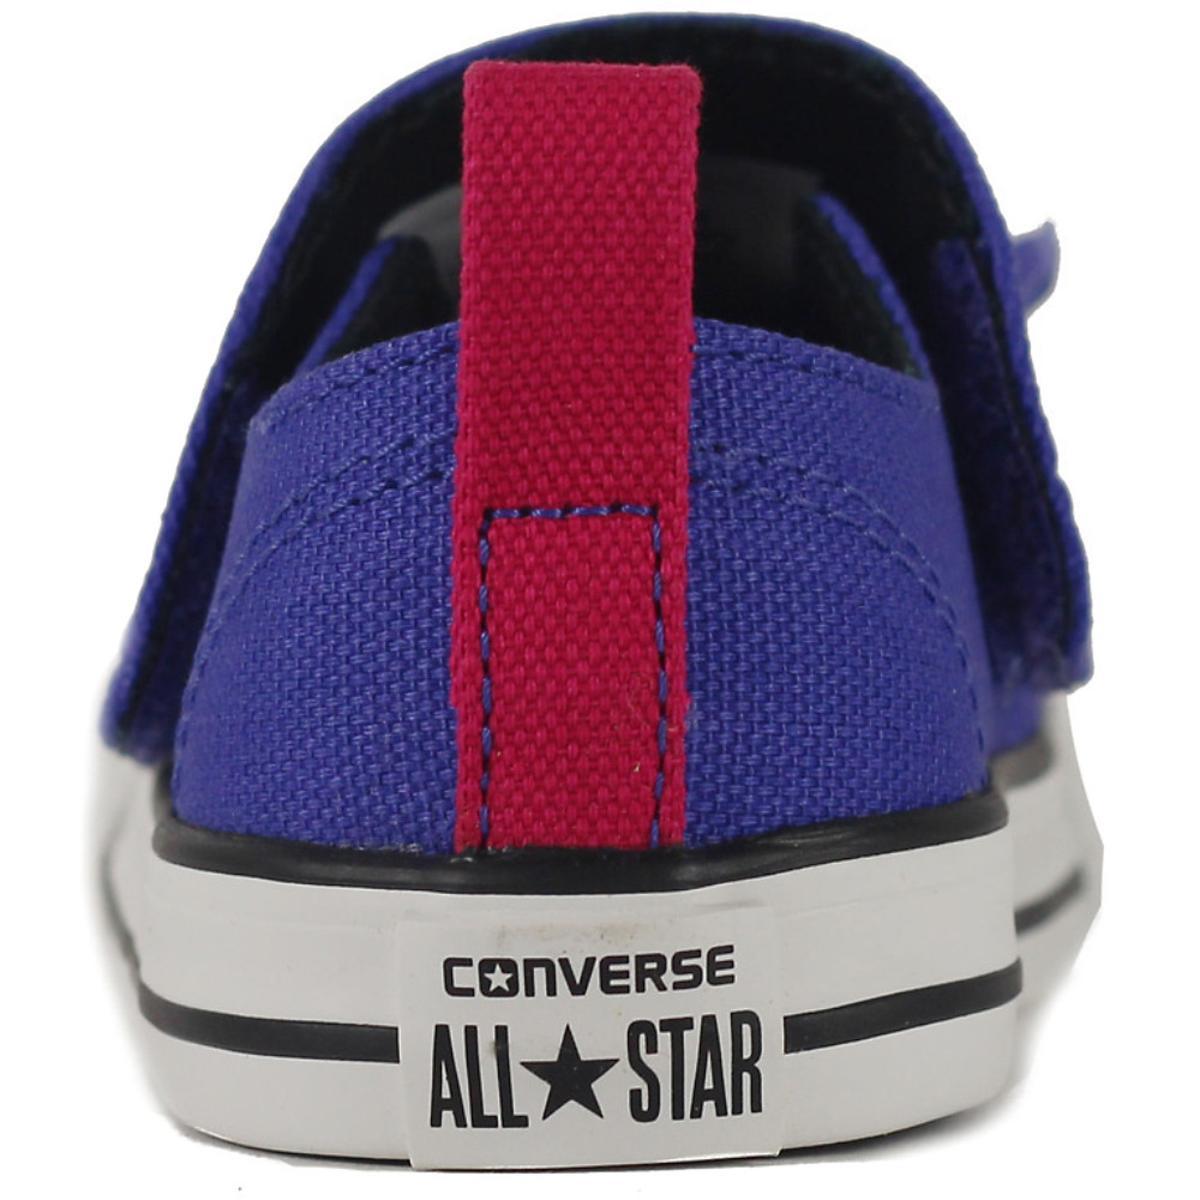 Toddler Chuck Taylor All Star Creatures Sneaker